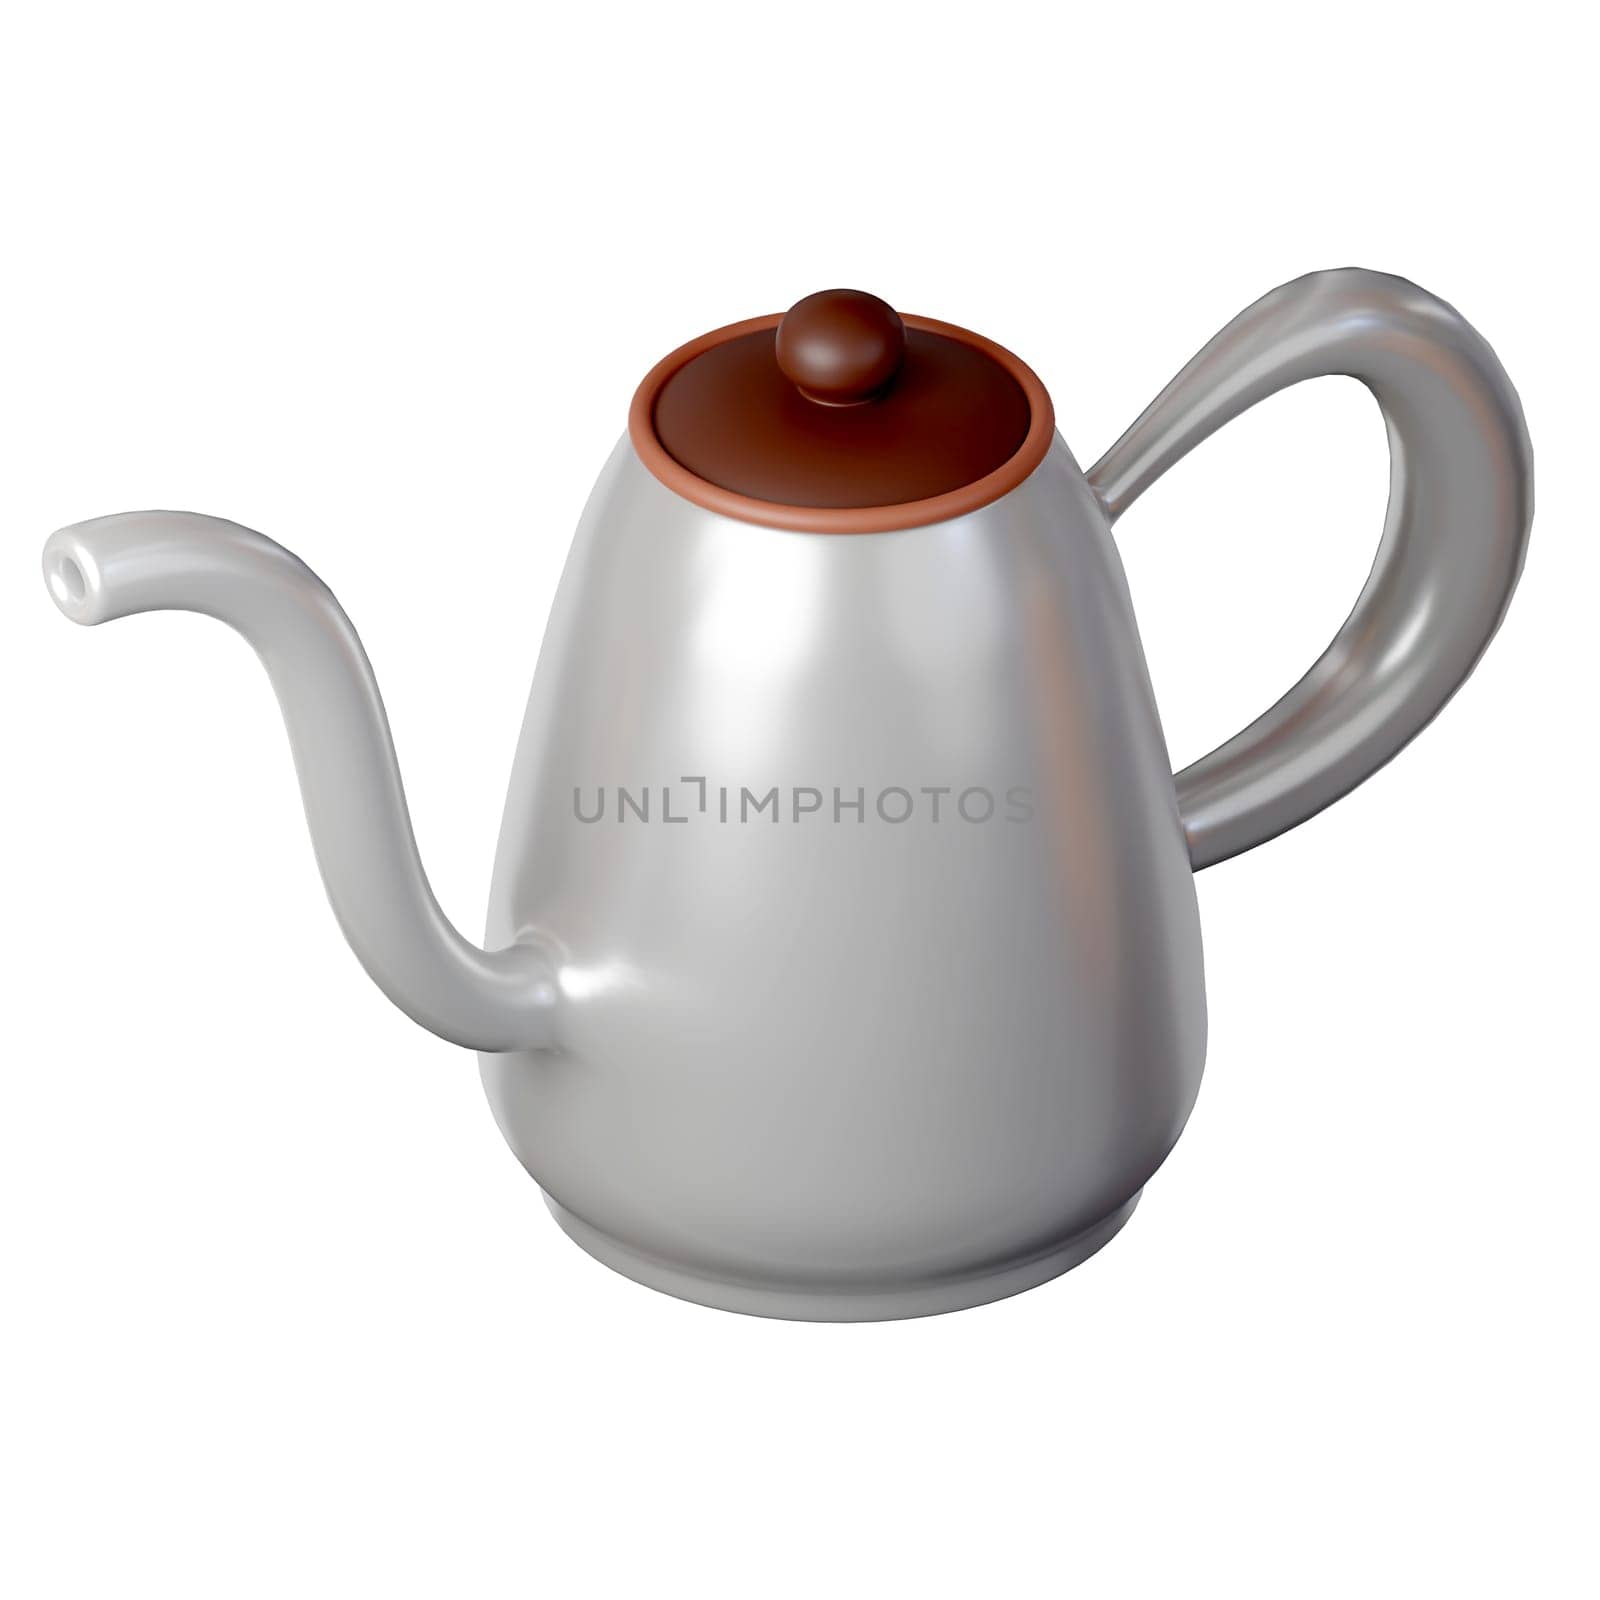 kettle , camping mug, coffee maker and isolated on white background. 3D render illustration. by meepiangraphic